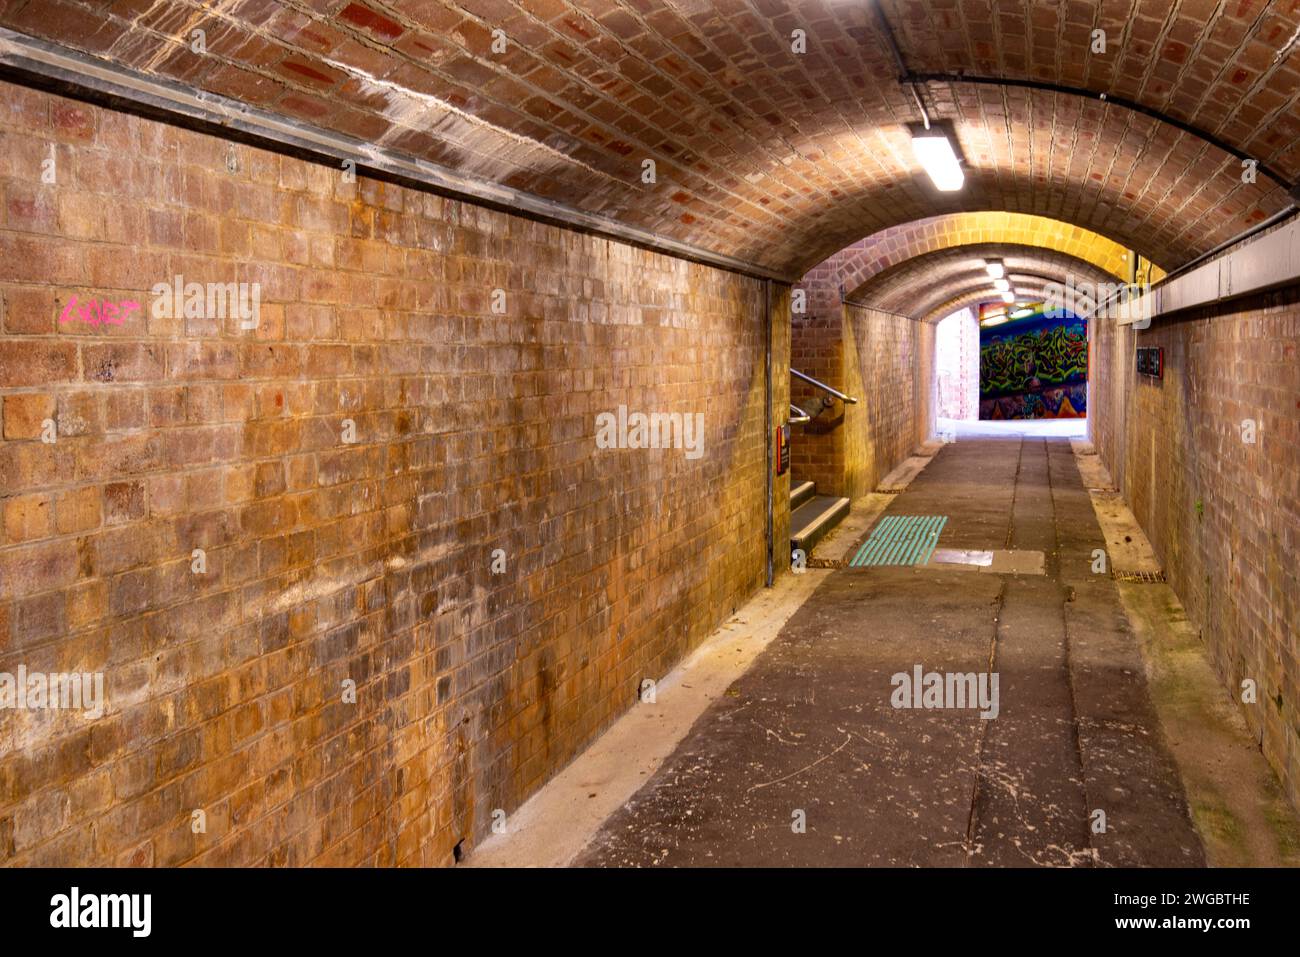 Double ended brick subway entrance provides access to the Lawson Railway Station island platform on the main western line in New South Wales Australia Stock Photo